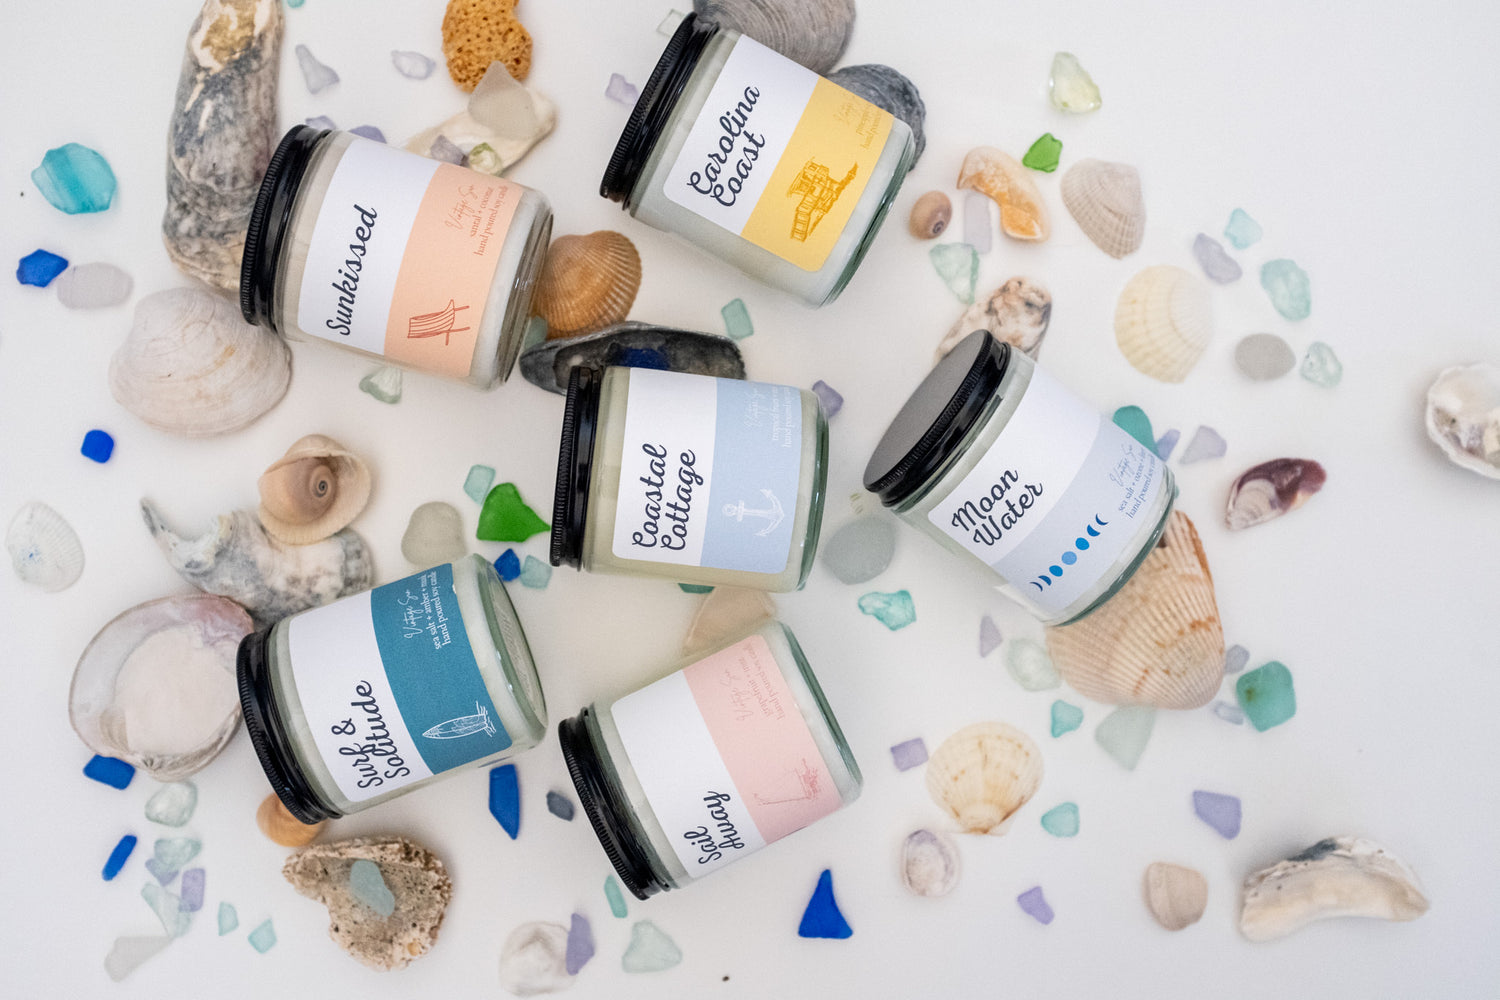 Our Sea Line is inspired by the Carolina Coast where we have spent many days soaking up the sun and enjoying the power and beauty of the ocean.